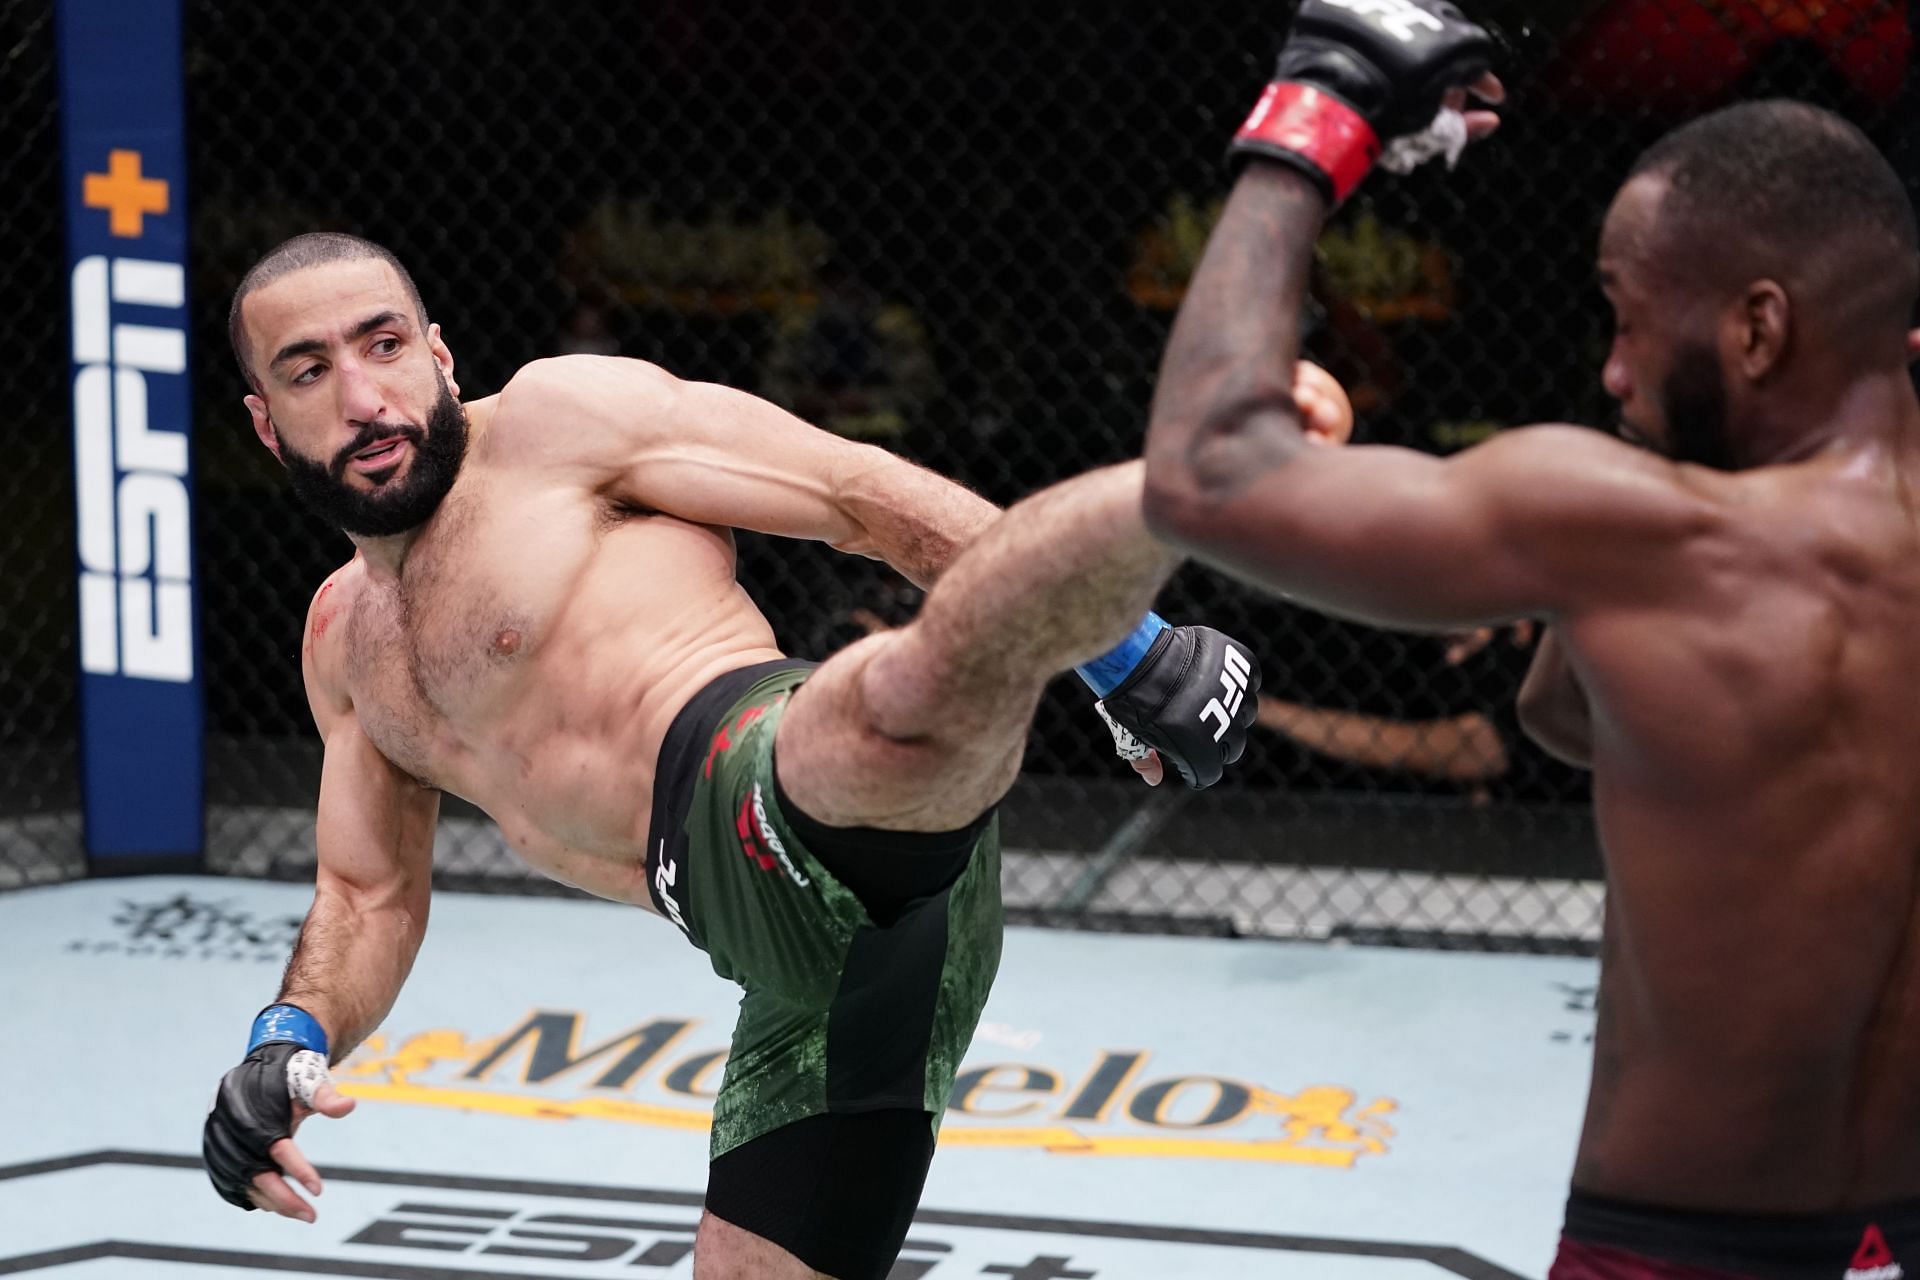 Can Belal Muhammad make the step up to the elite level at welterweight by knocking off Stephen Thompson this weekend?